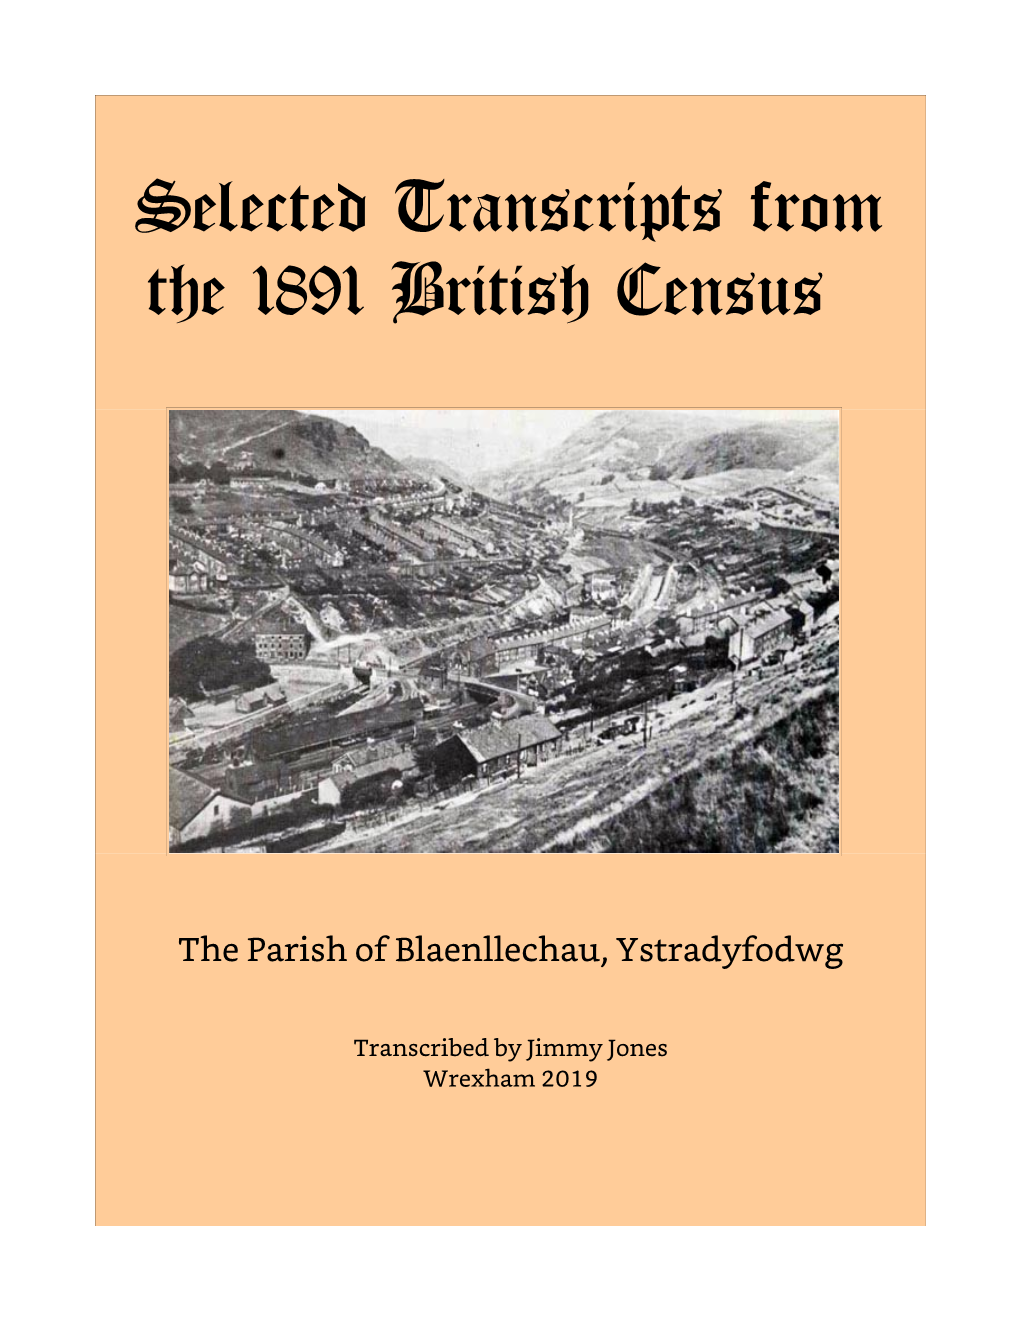 Selected Transcripts from the 1891 British Census